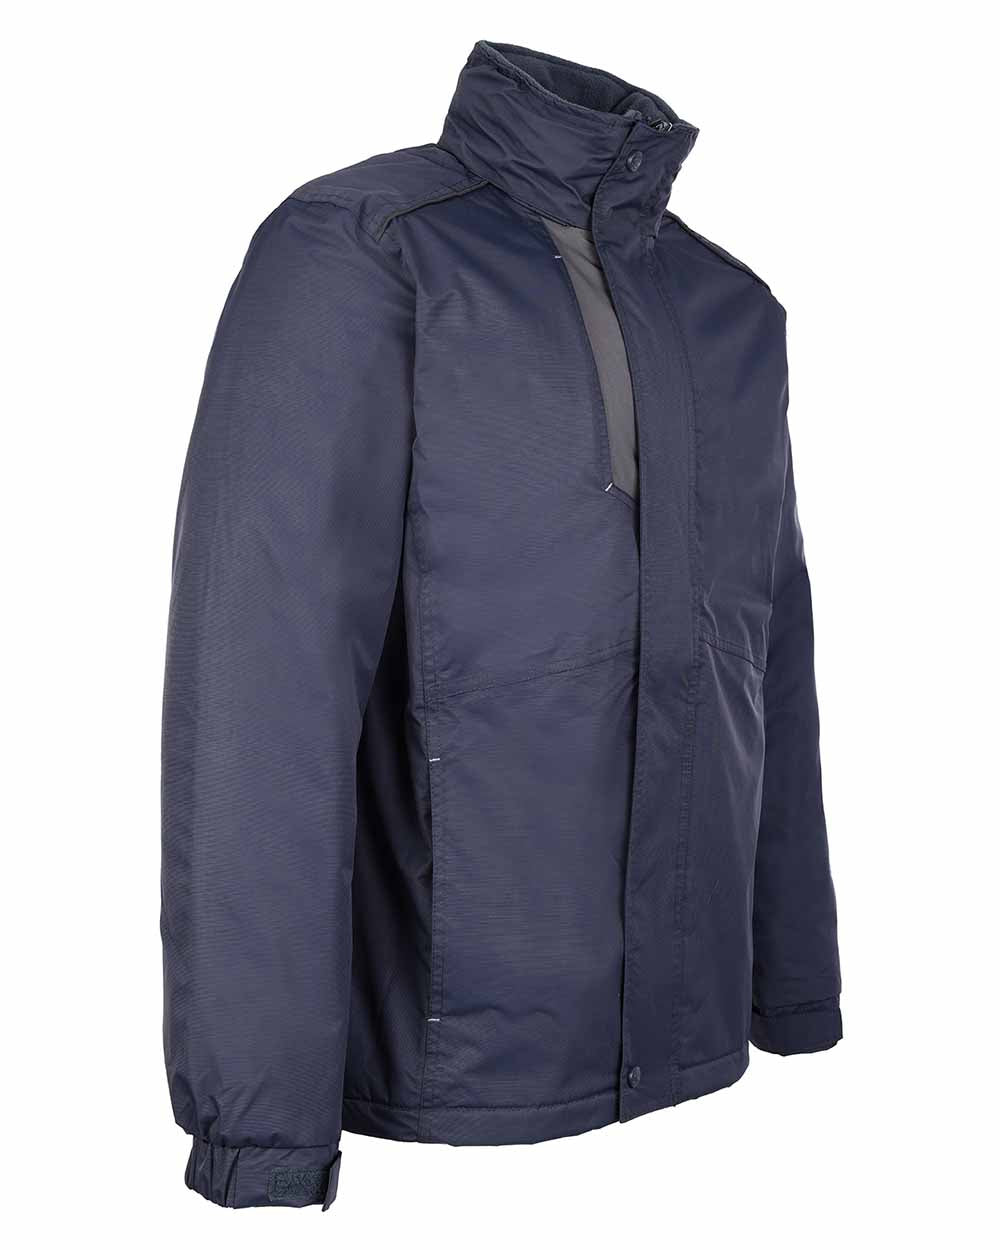 Navy Blue Coloured TuffStuff Newport Jacket On A White Background 